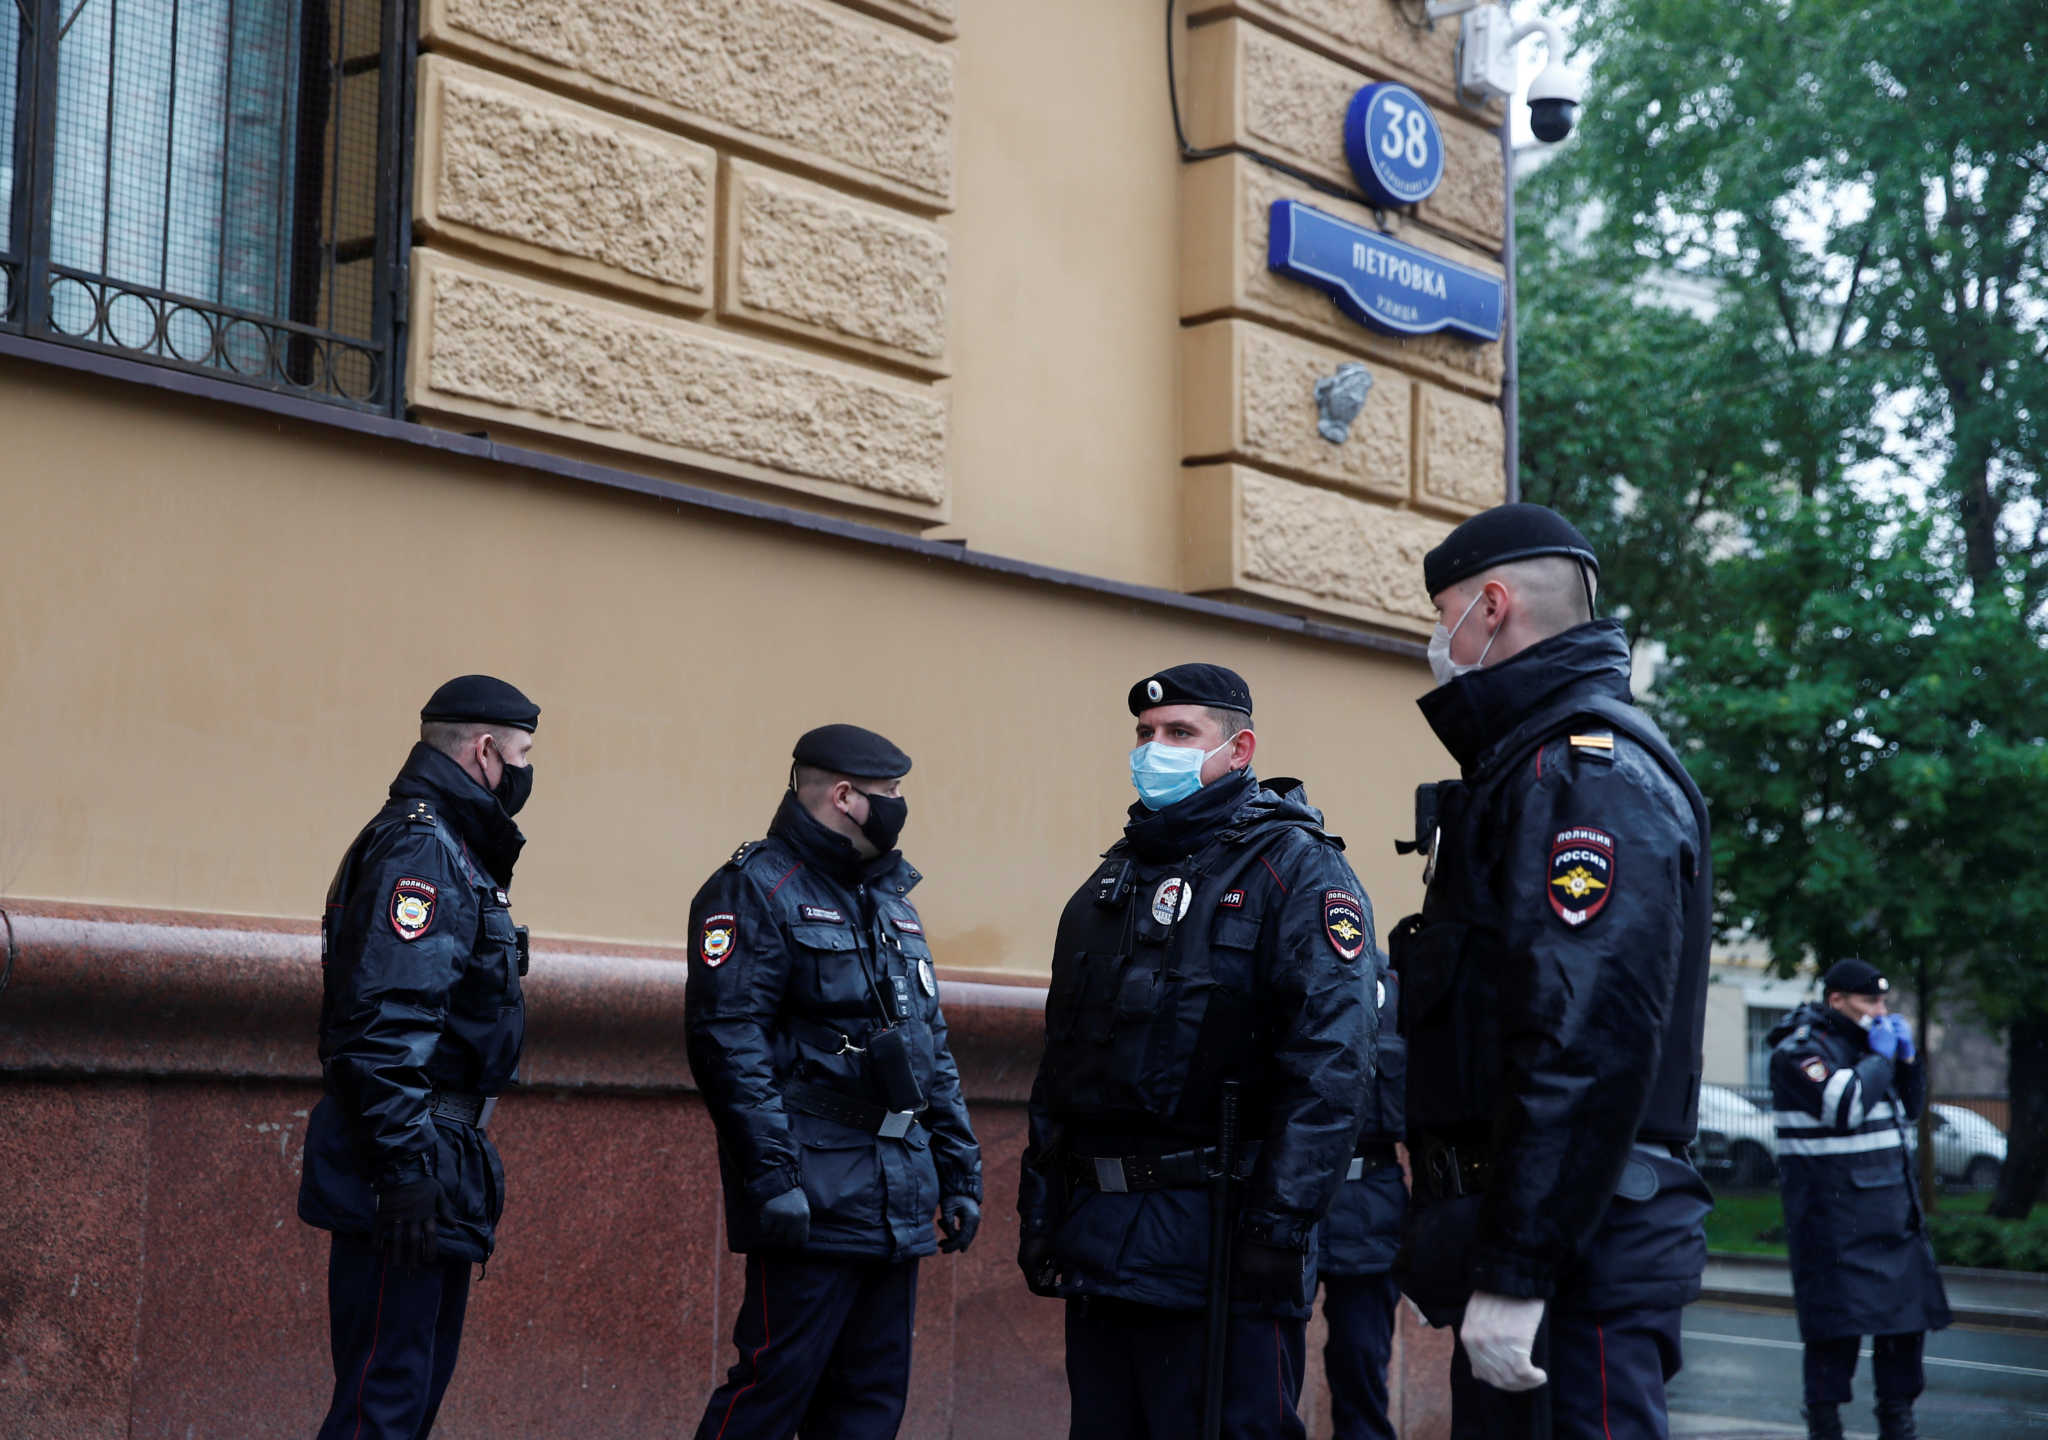 Russian police officers wearing protective face masks stand guard at a venue for pickets in support of journalist Ilya Azar, following a court's decision to jail him for his one-person protest during the coronavirus disease (COVID-19) lockdown, in Moscow, Russia May 29, 2020. REUTERS/Maxim Shemetov